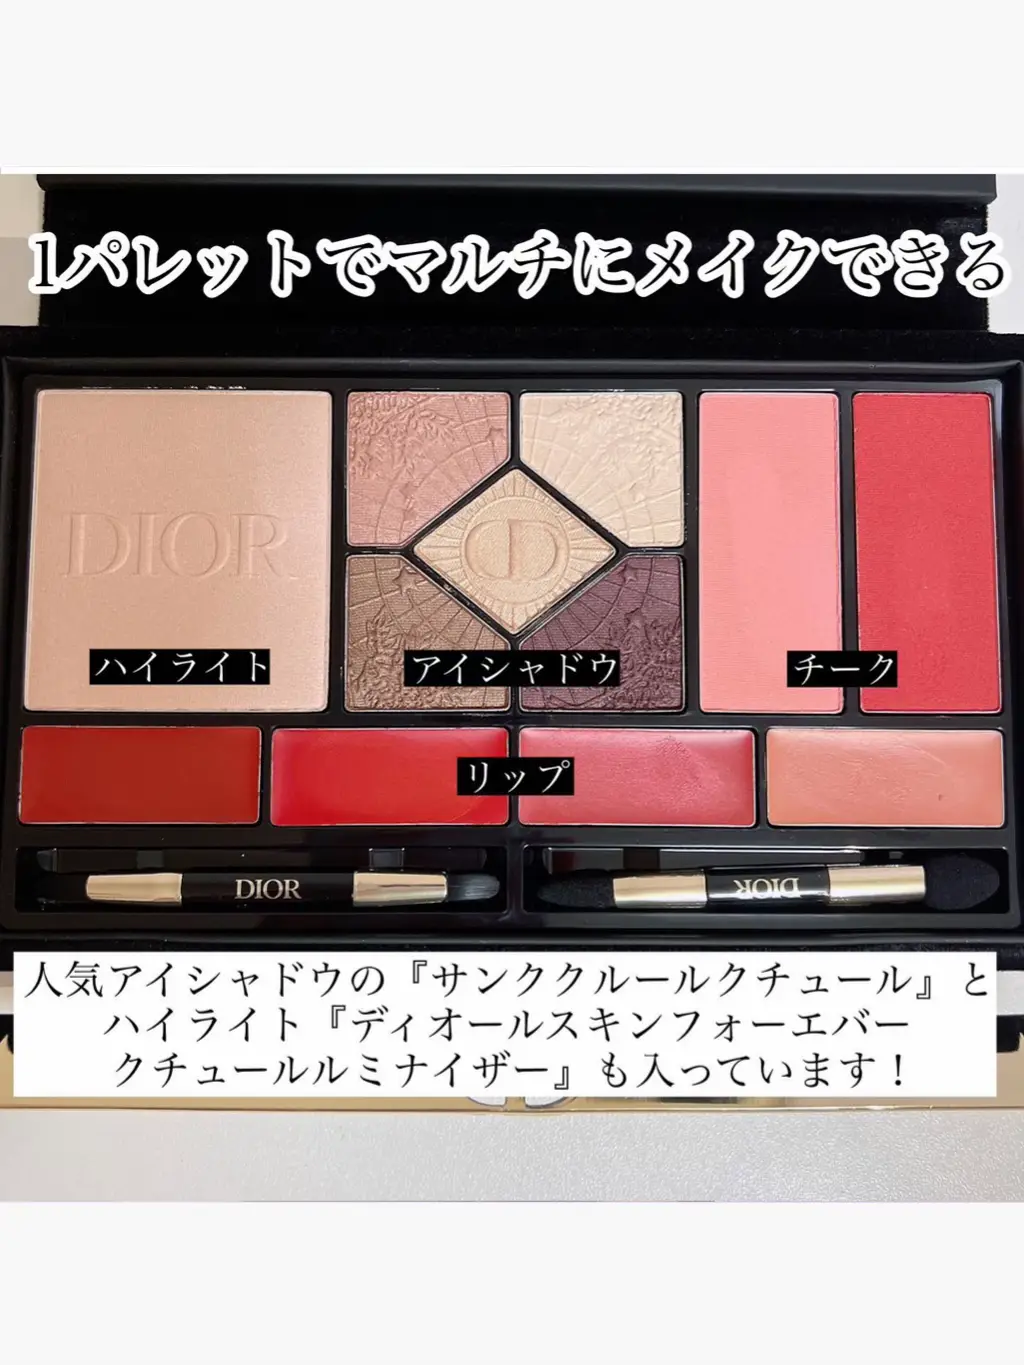 DIOR COUTURE PALETTE EDITION VOYAGE パレット - メイクアップ